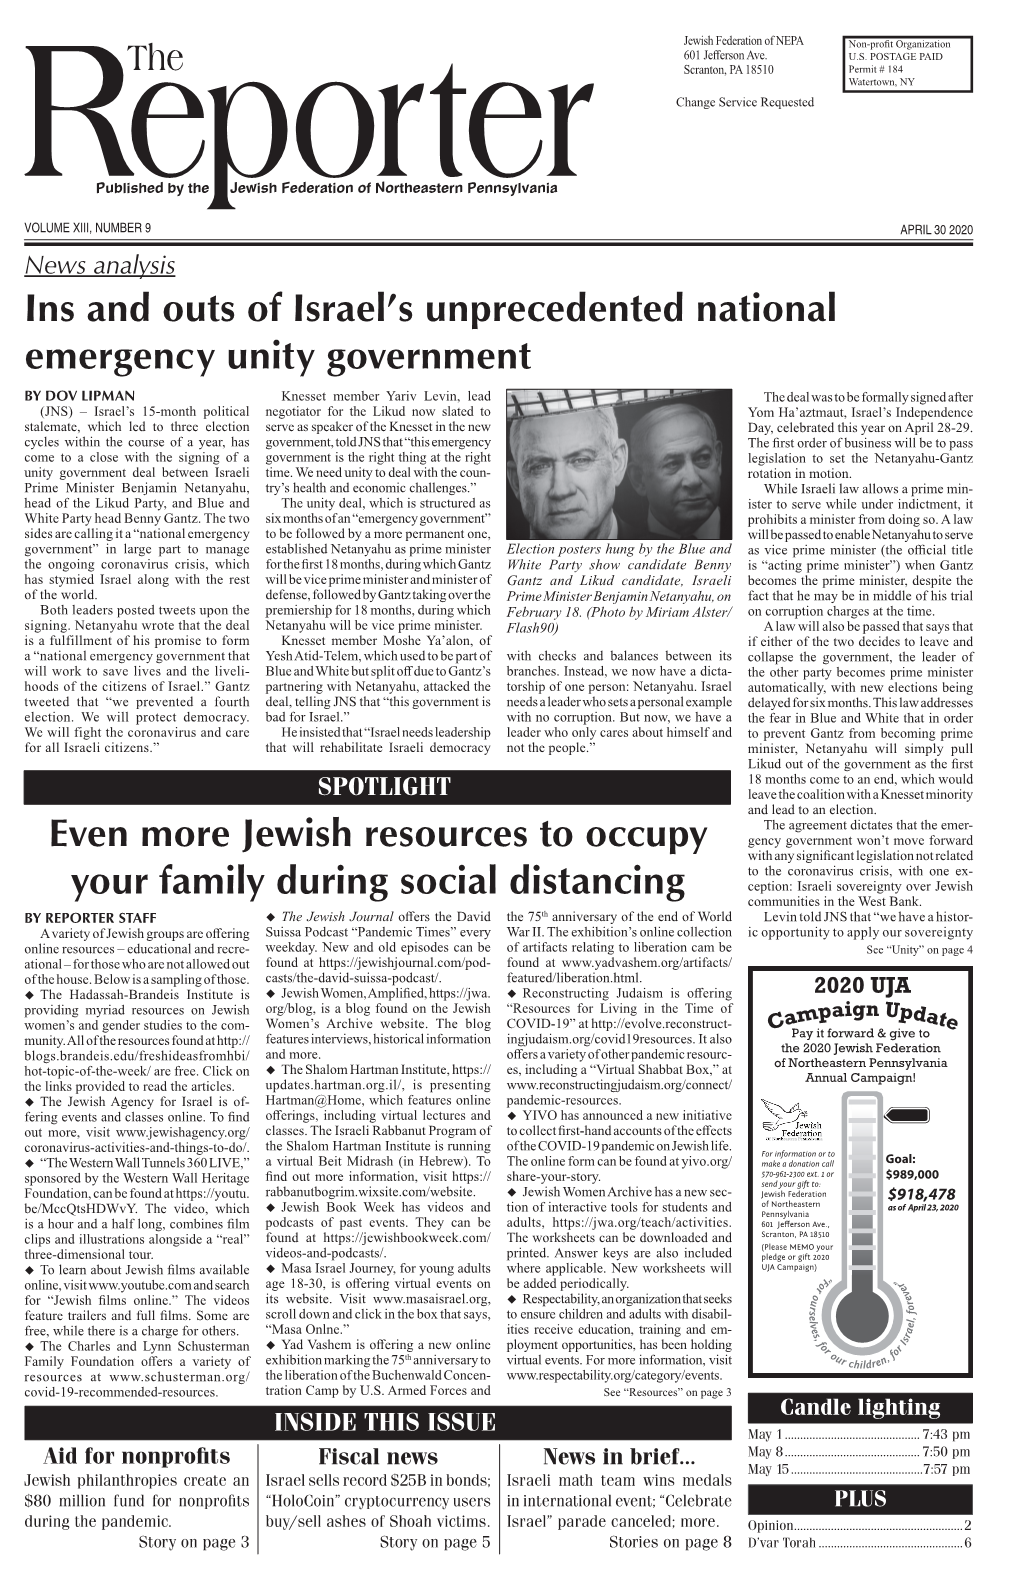 Even More Jewish Resources to Occupy Your Family During Social Distancing Ins and Outs of Israel's Unprecedented National Emer